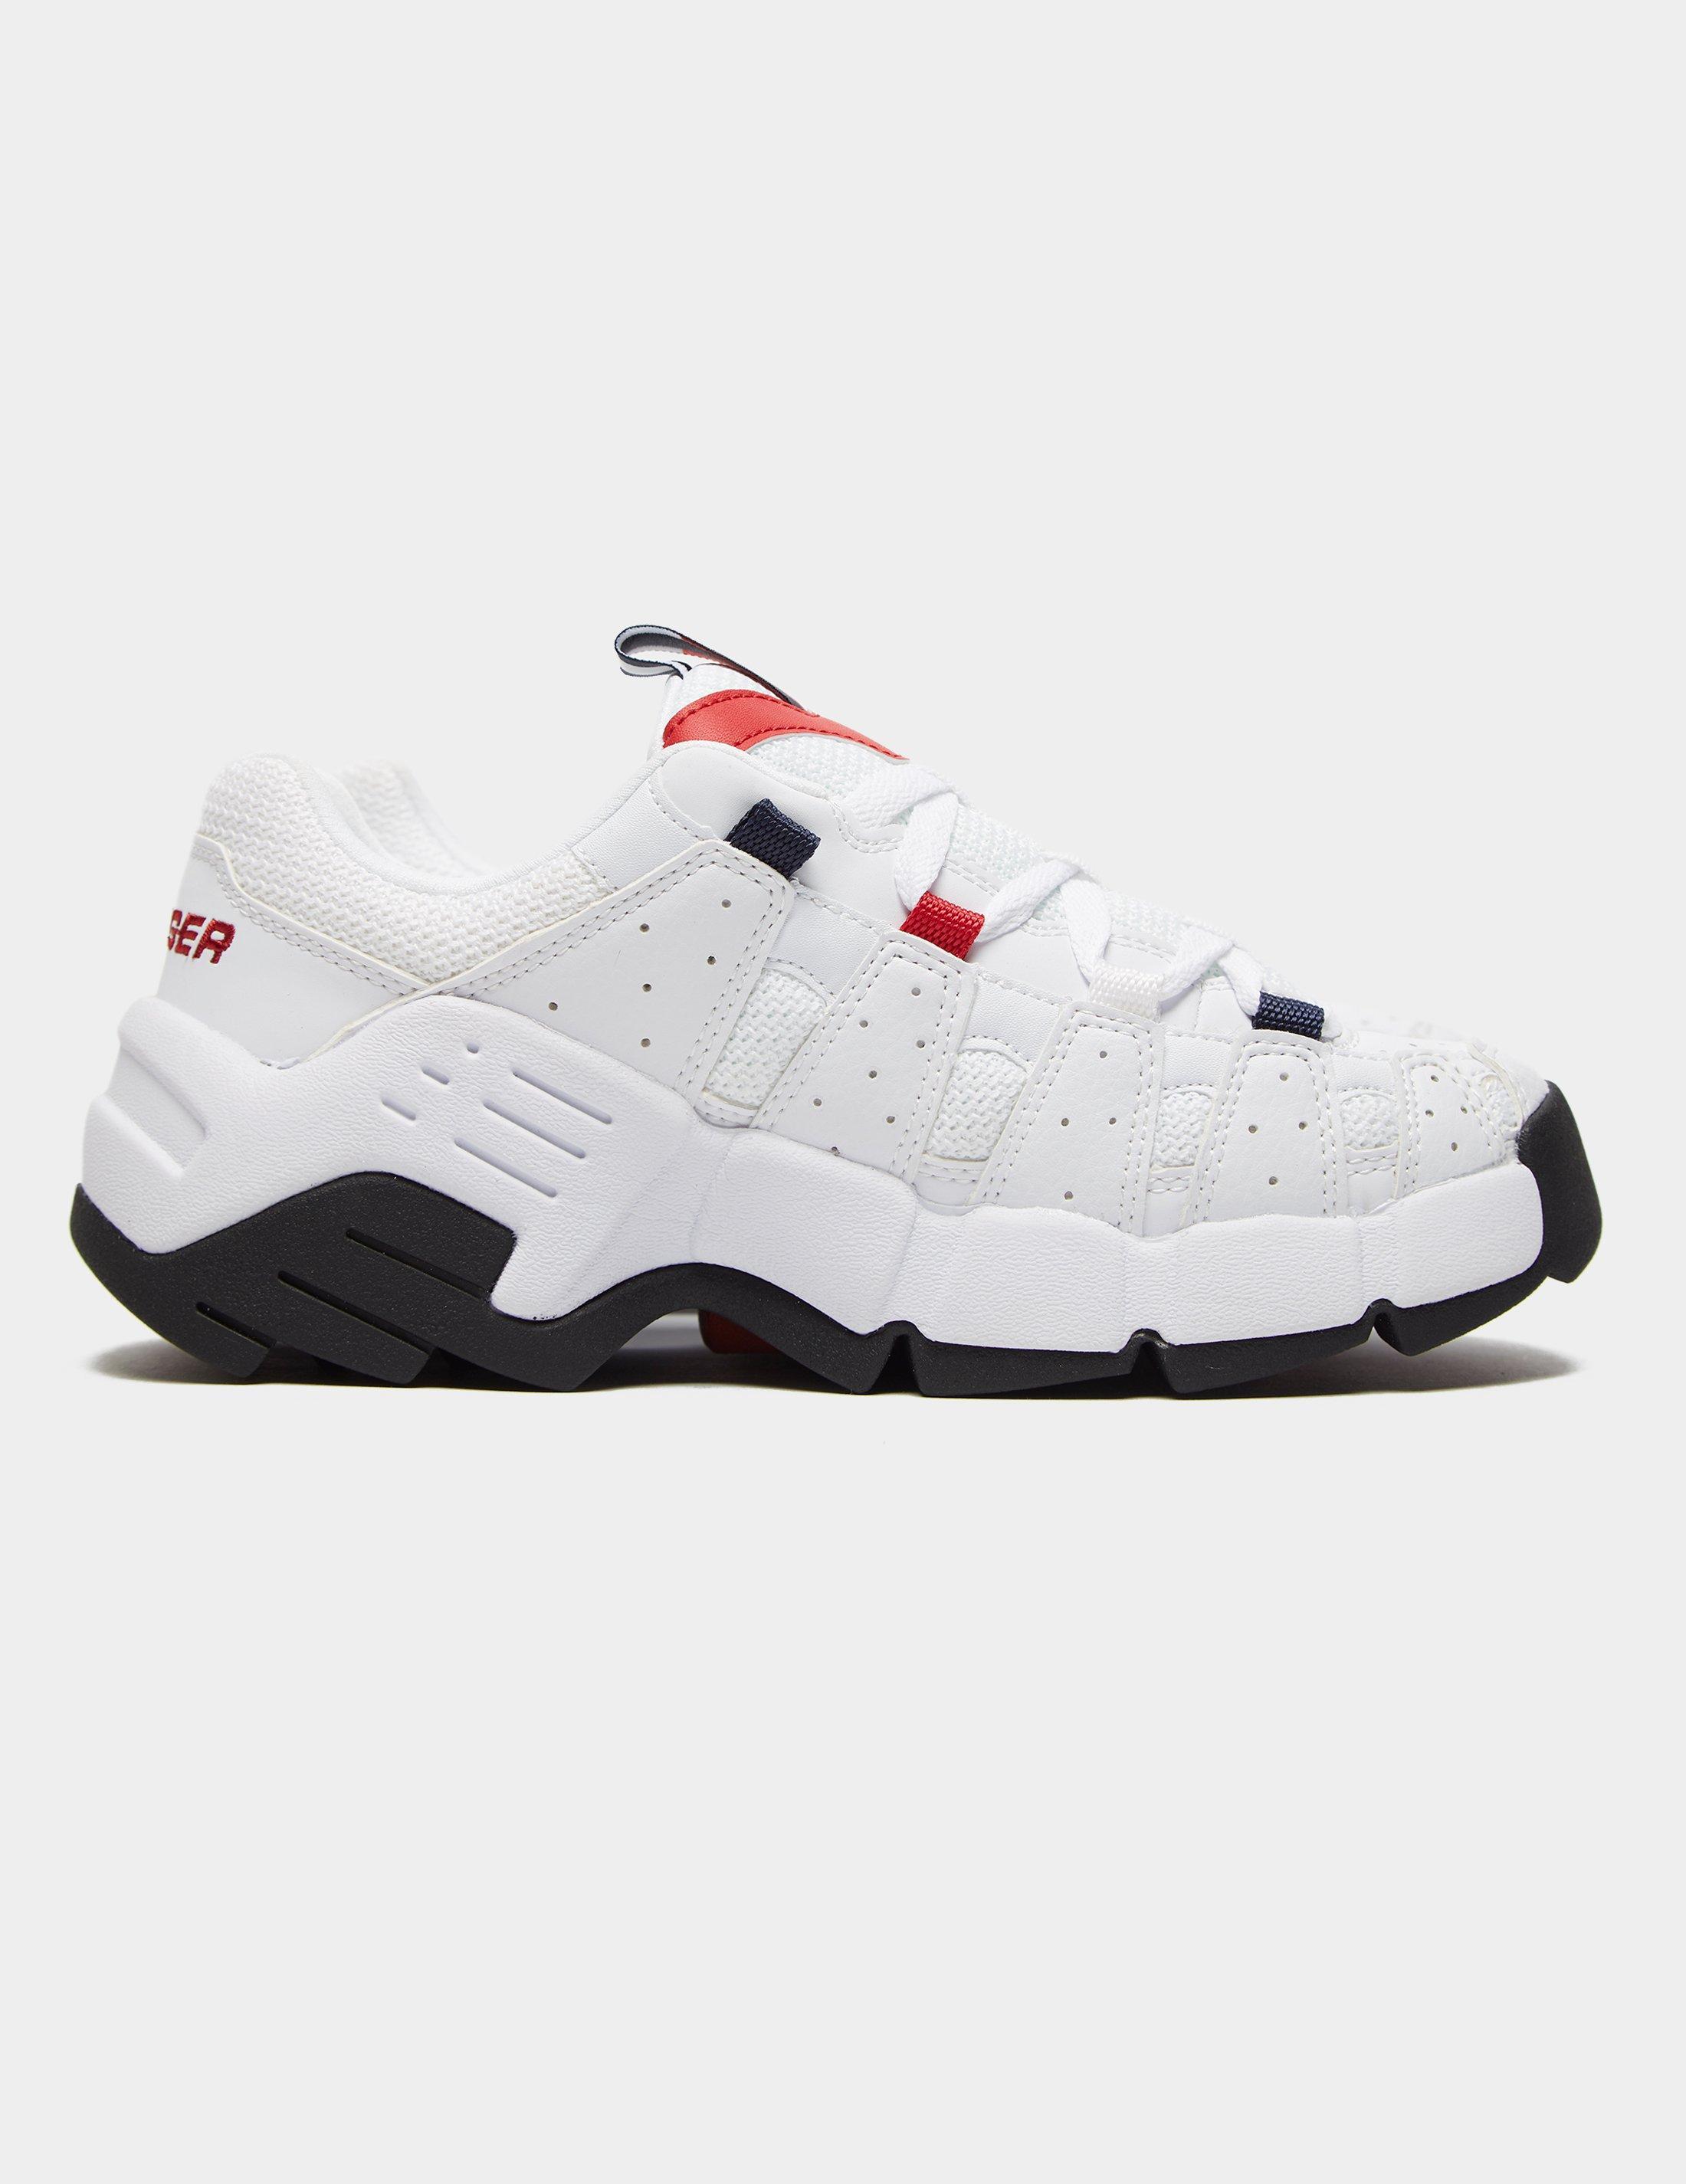 Tommy Hilfiger Leather Heritage Chunky Sneaker in White | Lyst